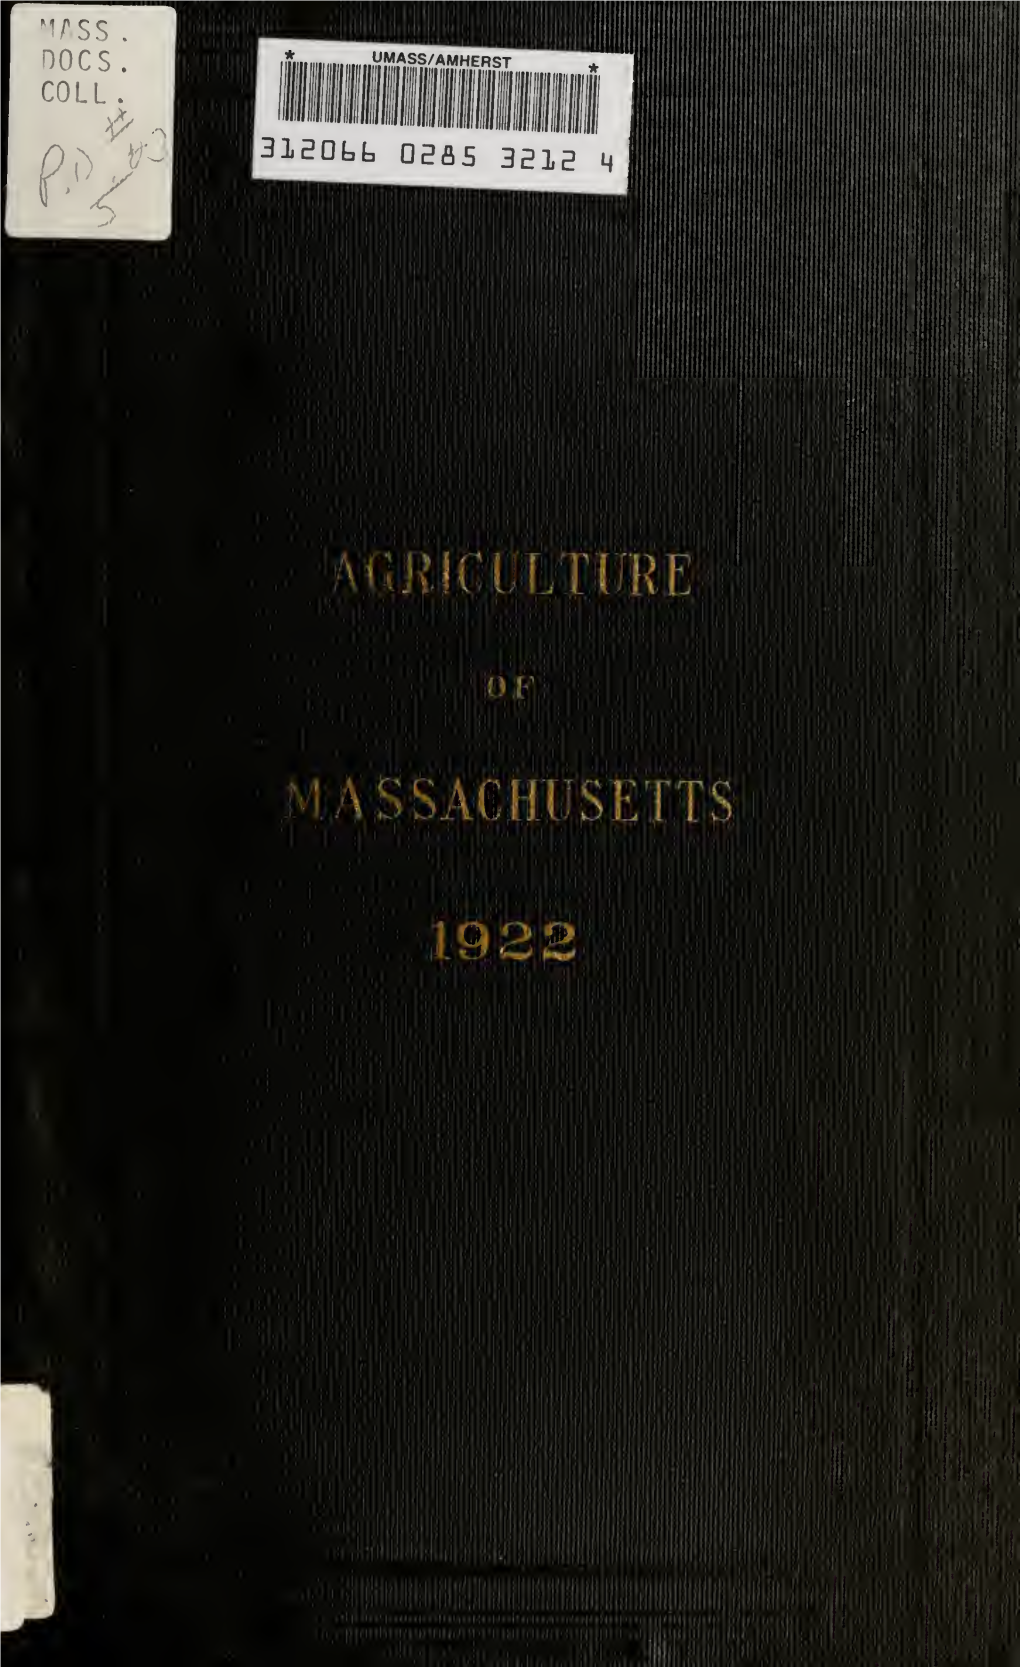 Annual Report of the Department of Agriculture